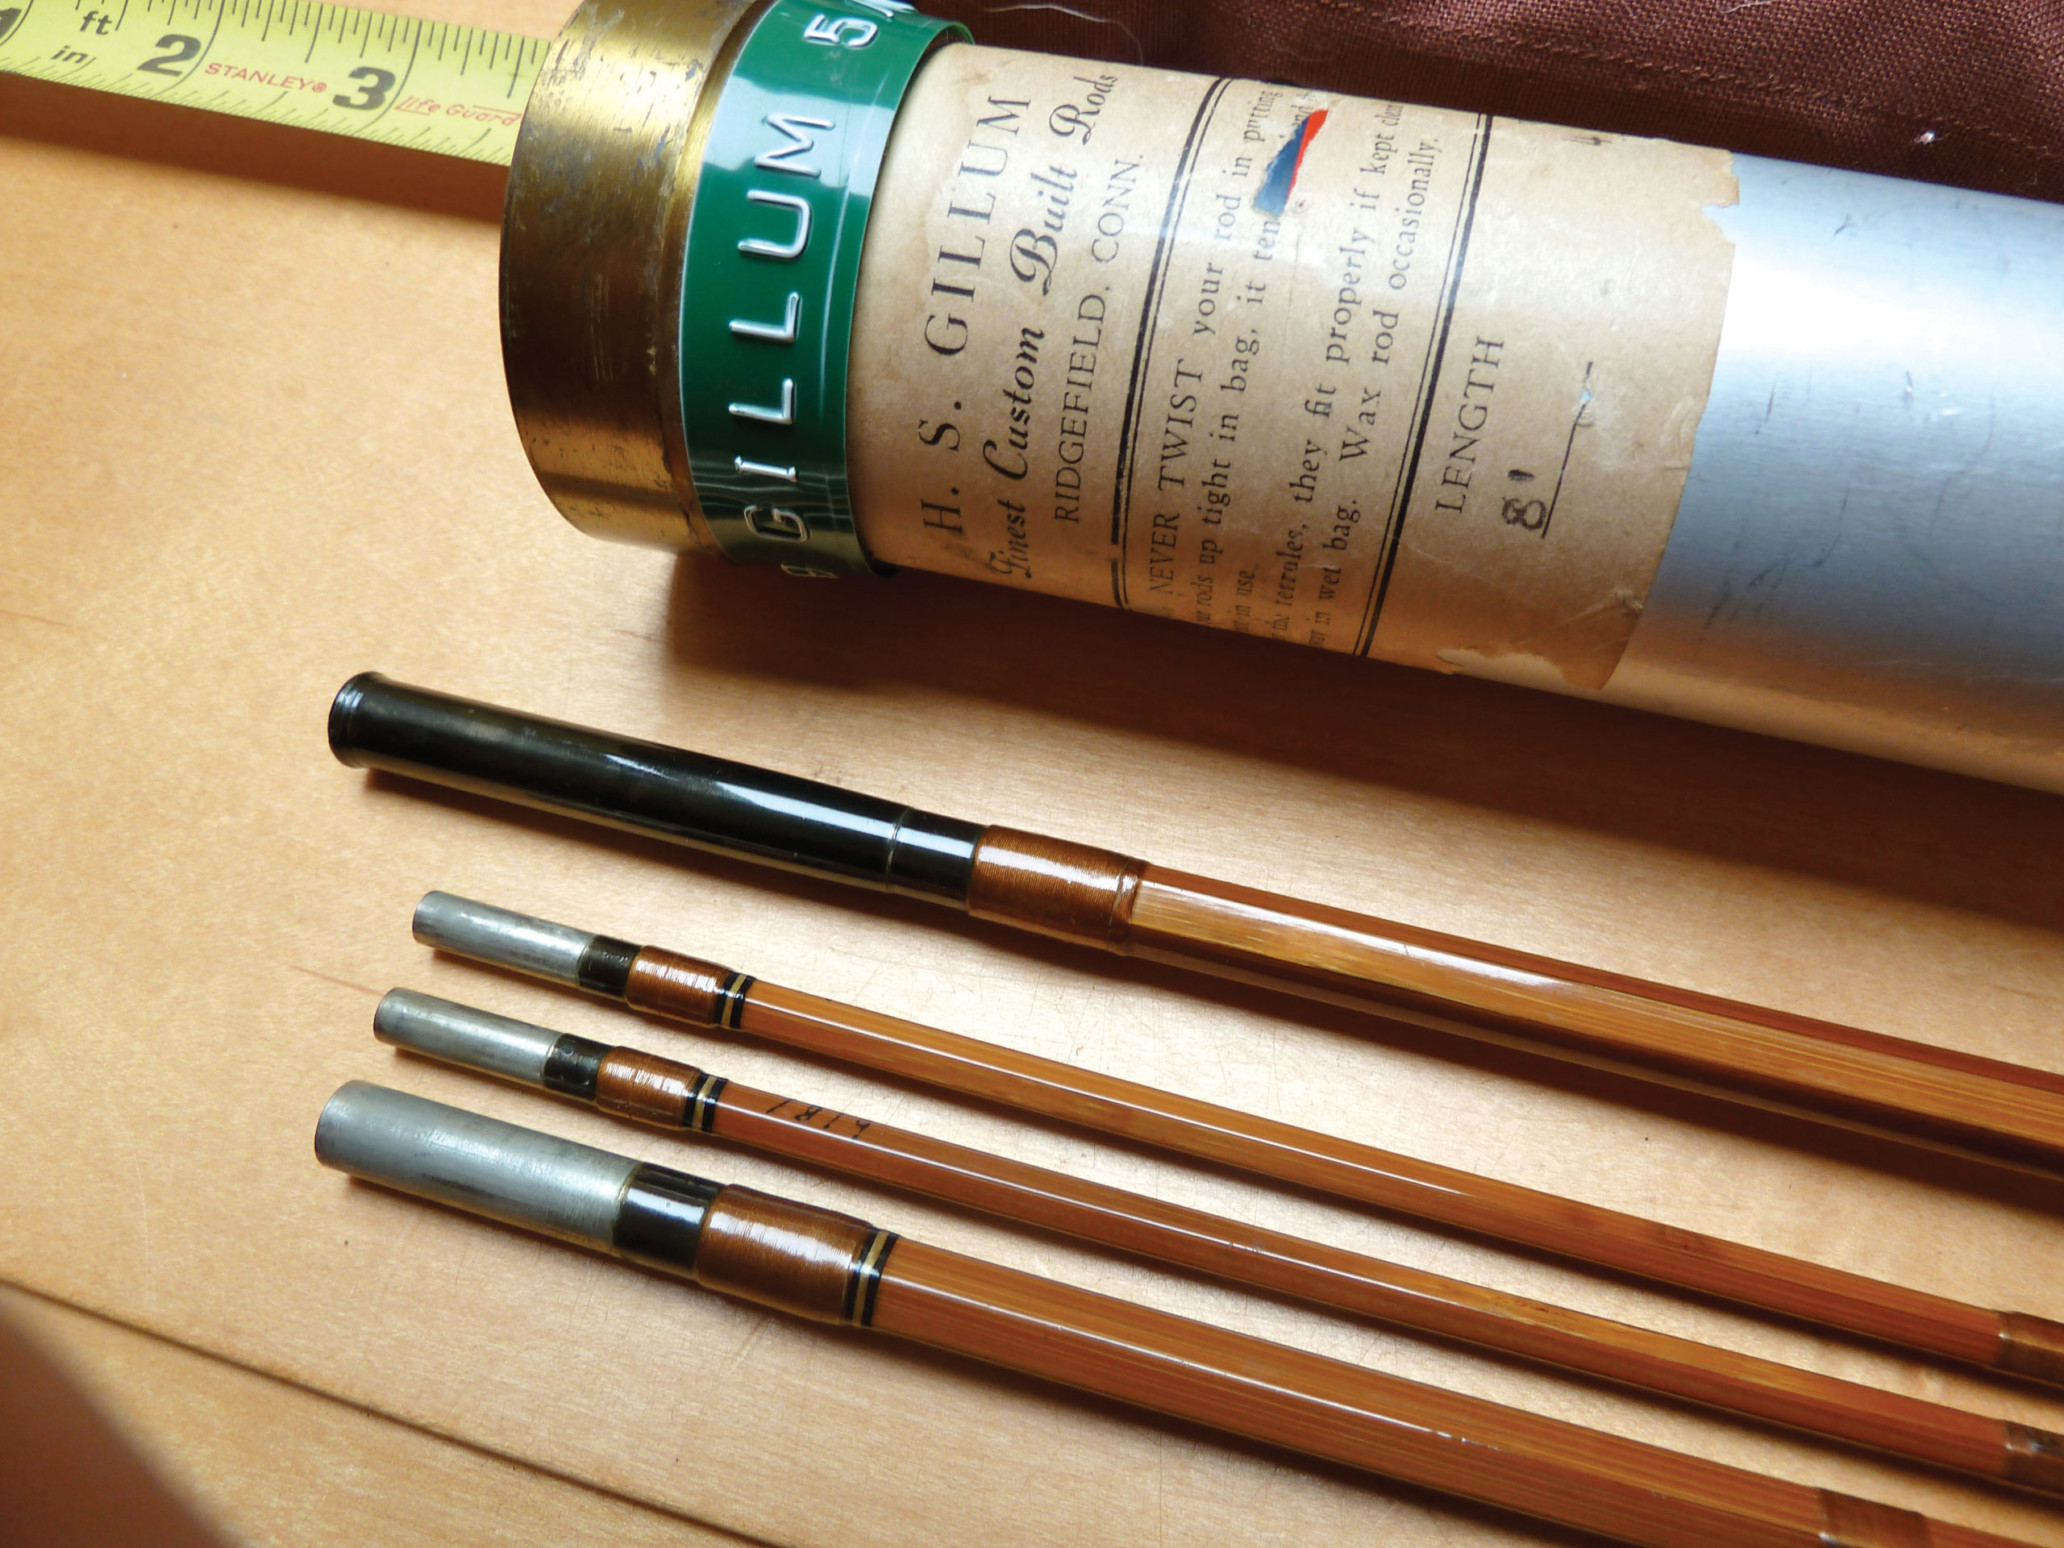 Bamboo Fly Rod Identification and Value